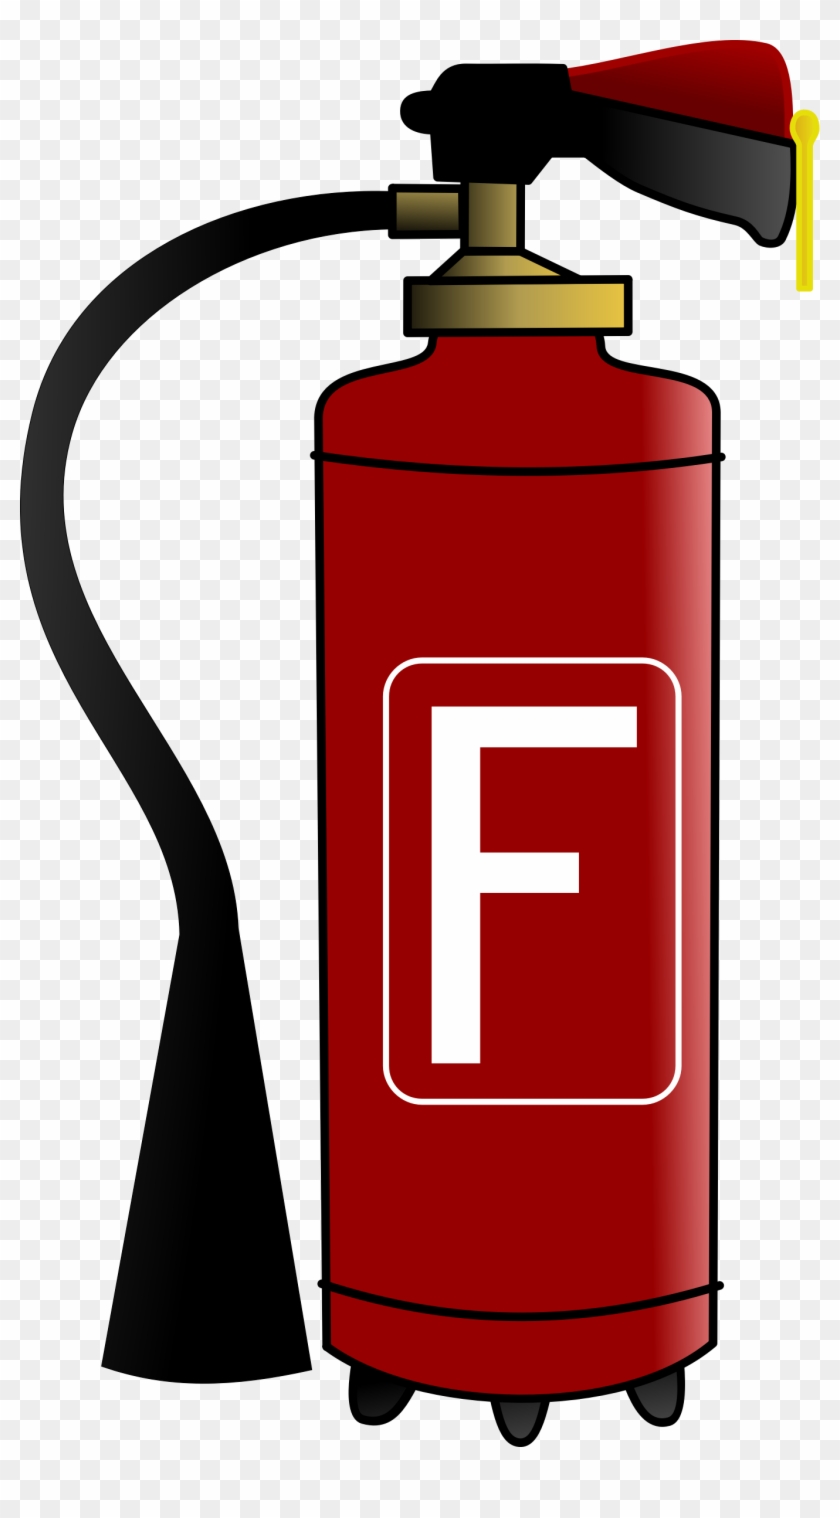 Fire Extinguisher - Fire Extinguisher Clipart Png #189715